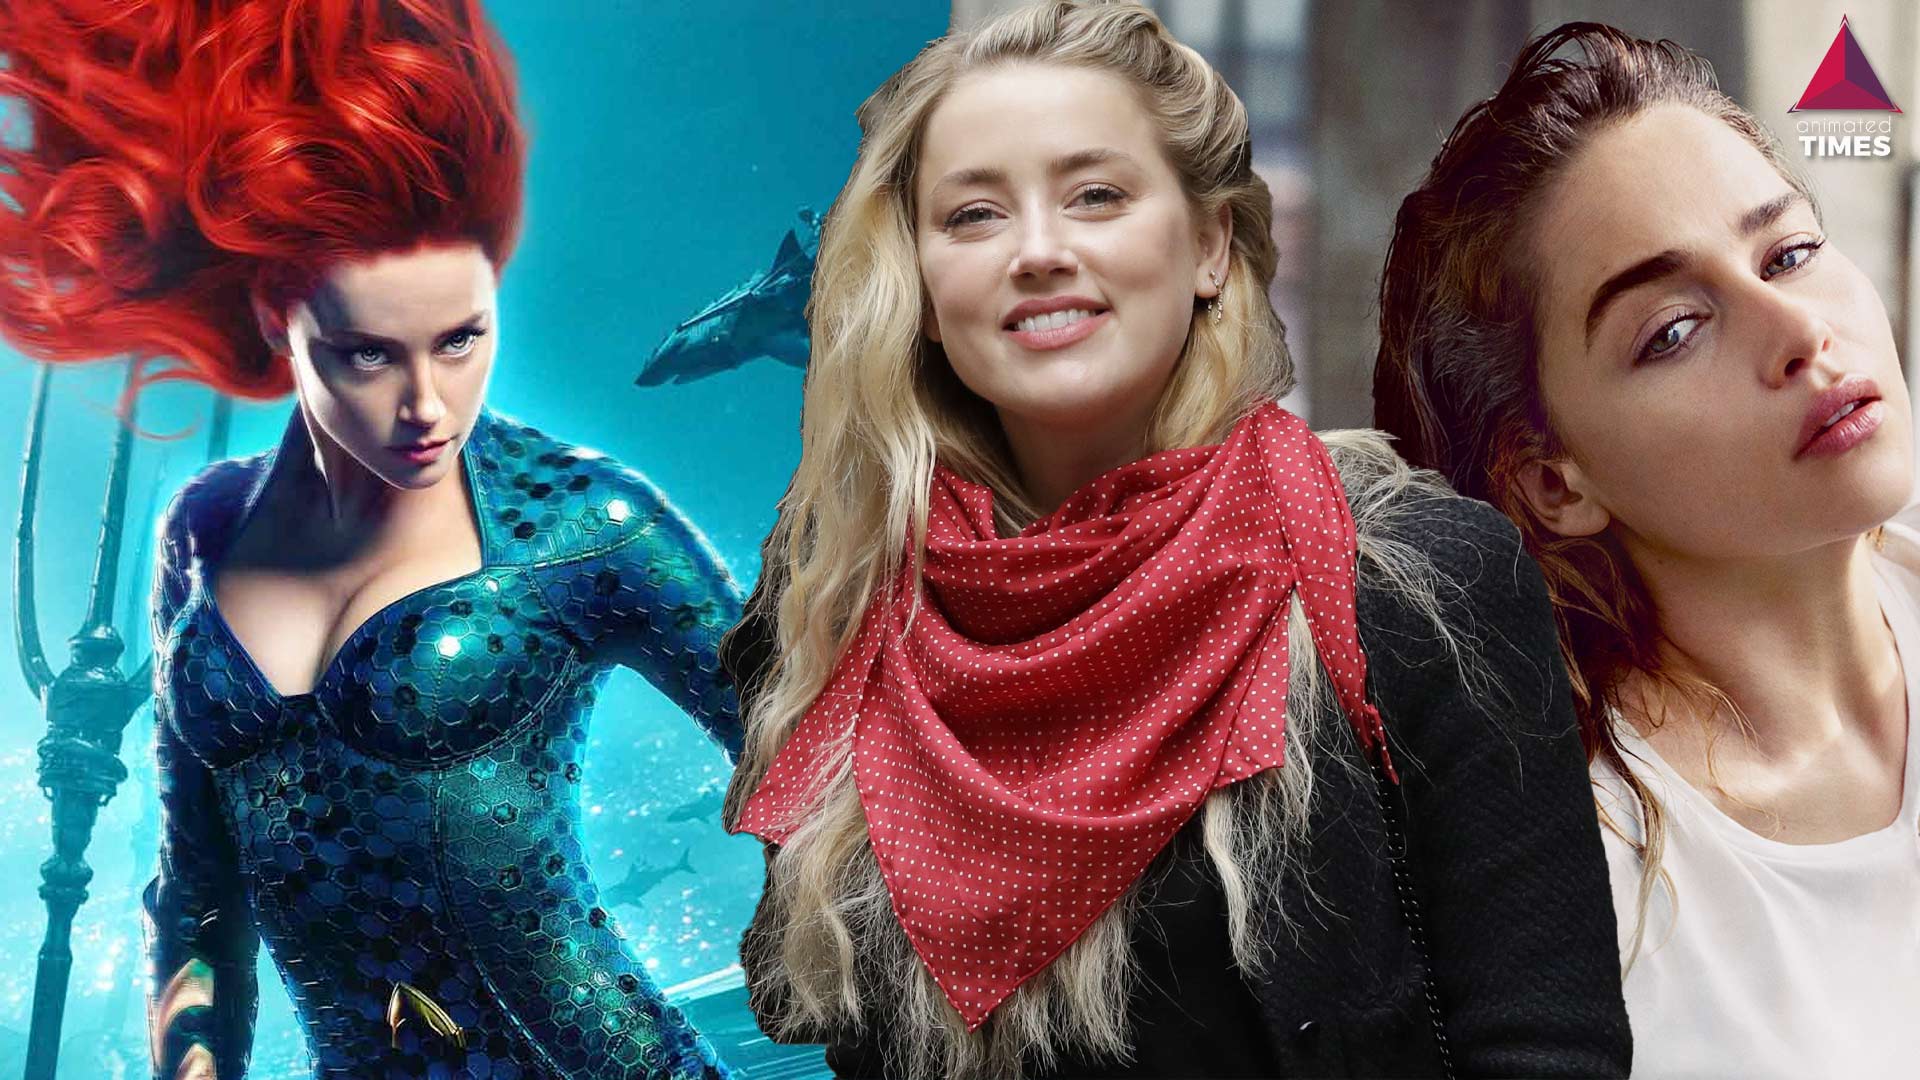 Has Amber Heard Been Fired From Aquaman 2 For Drug Use?